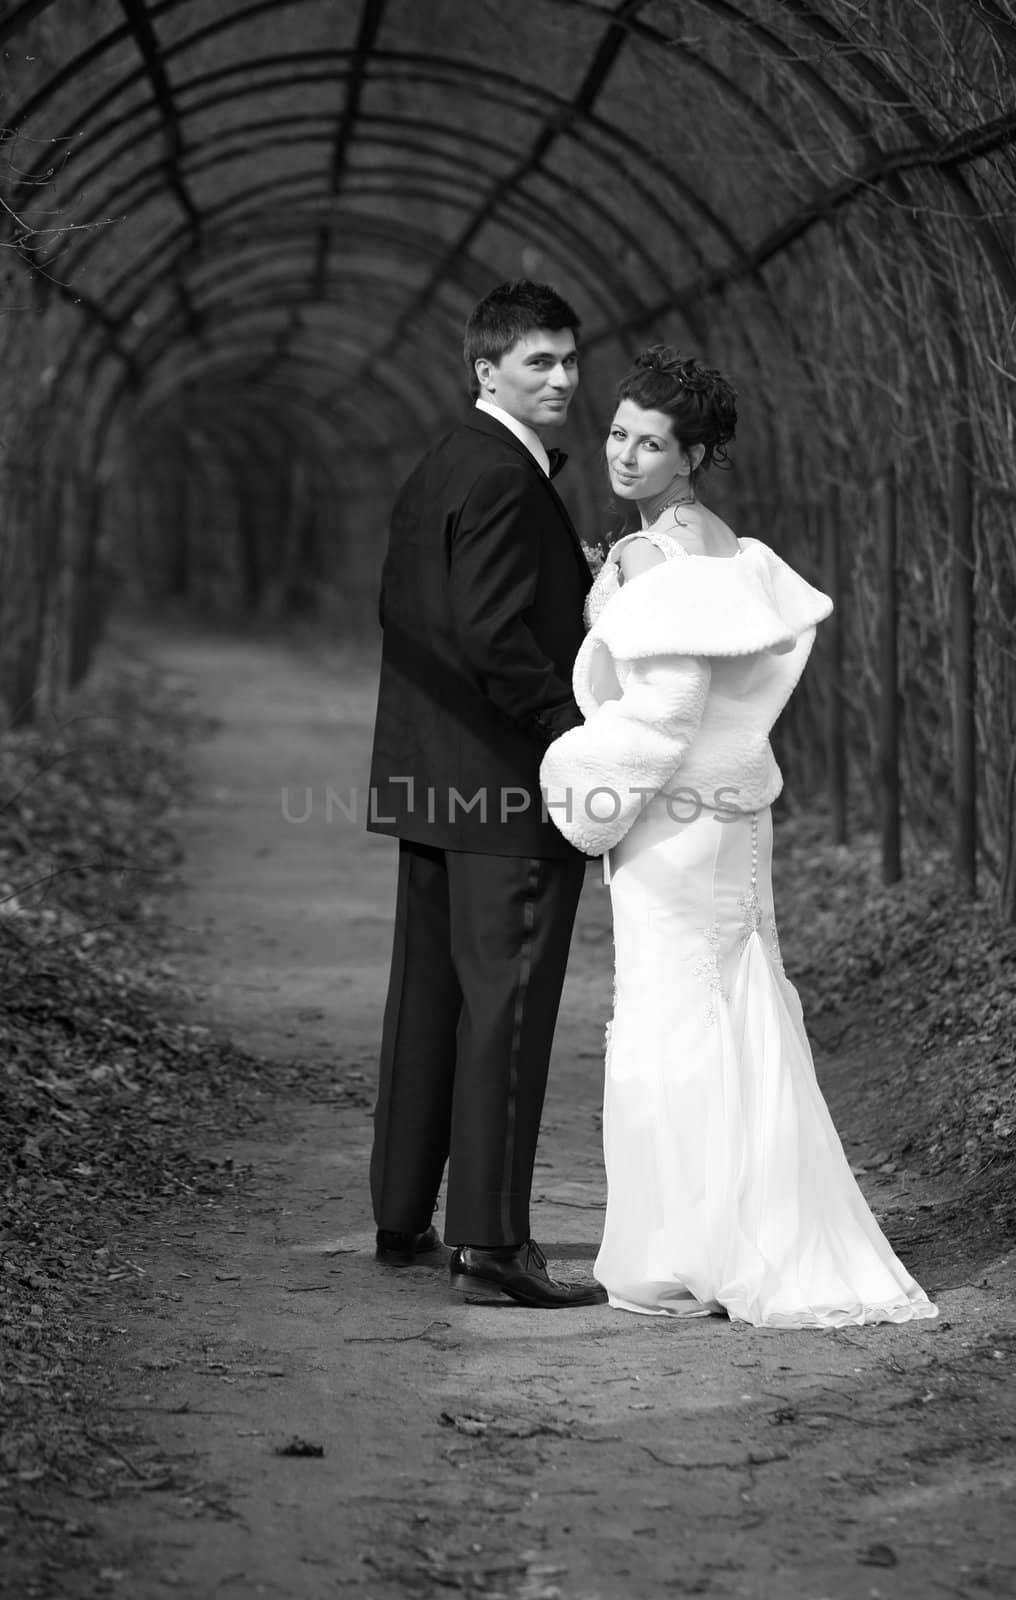 The groom and the bride walk in park. b/w